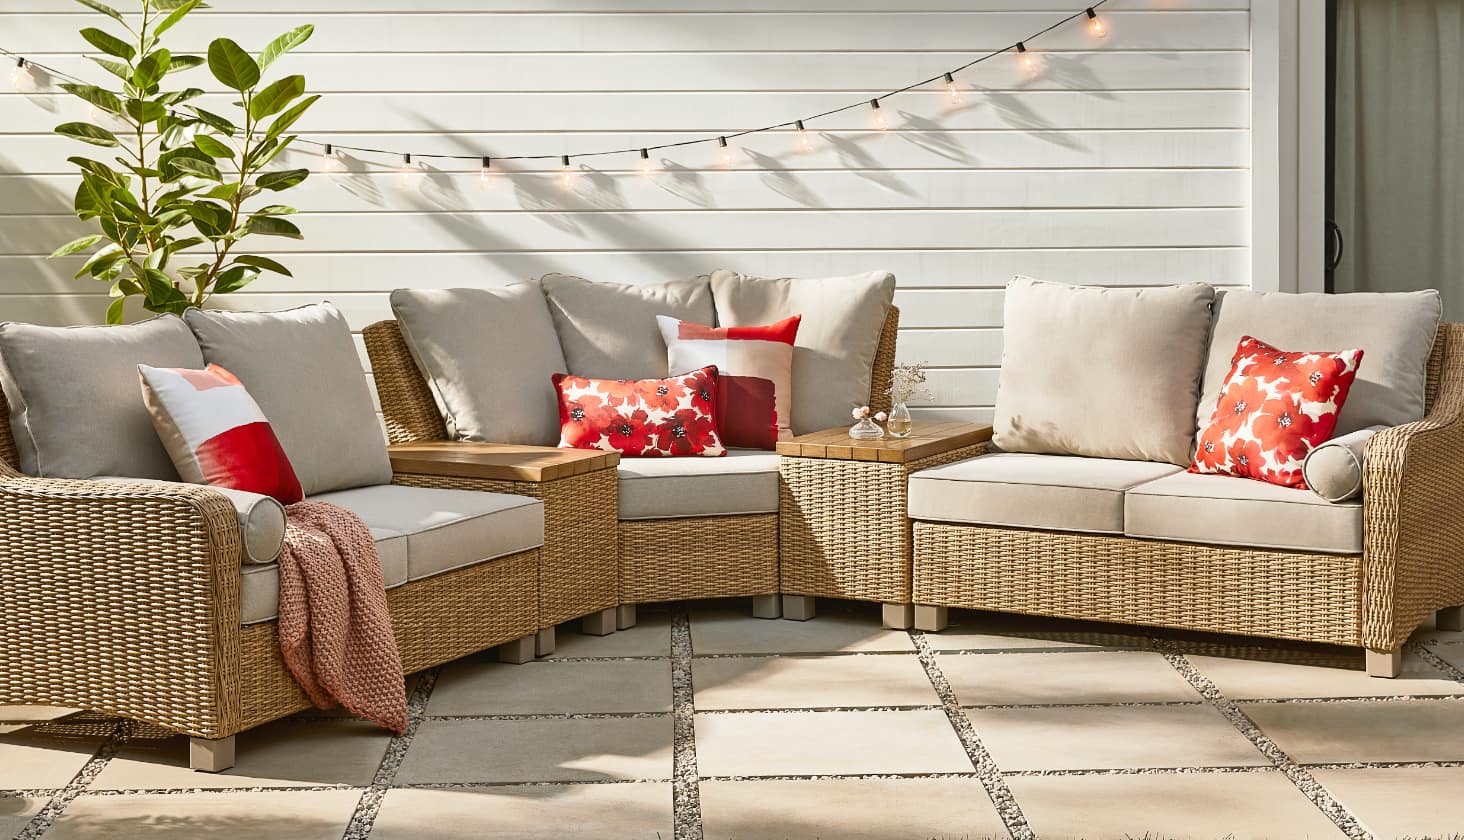 CANVAS MORAINE SECTIONAL Sectional offers comfortable seating for 5 with a dynamic design that allows for different configuration options with storage tables. Features cord passthrough spots, ideal for work from home. SHOP NOW